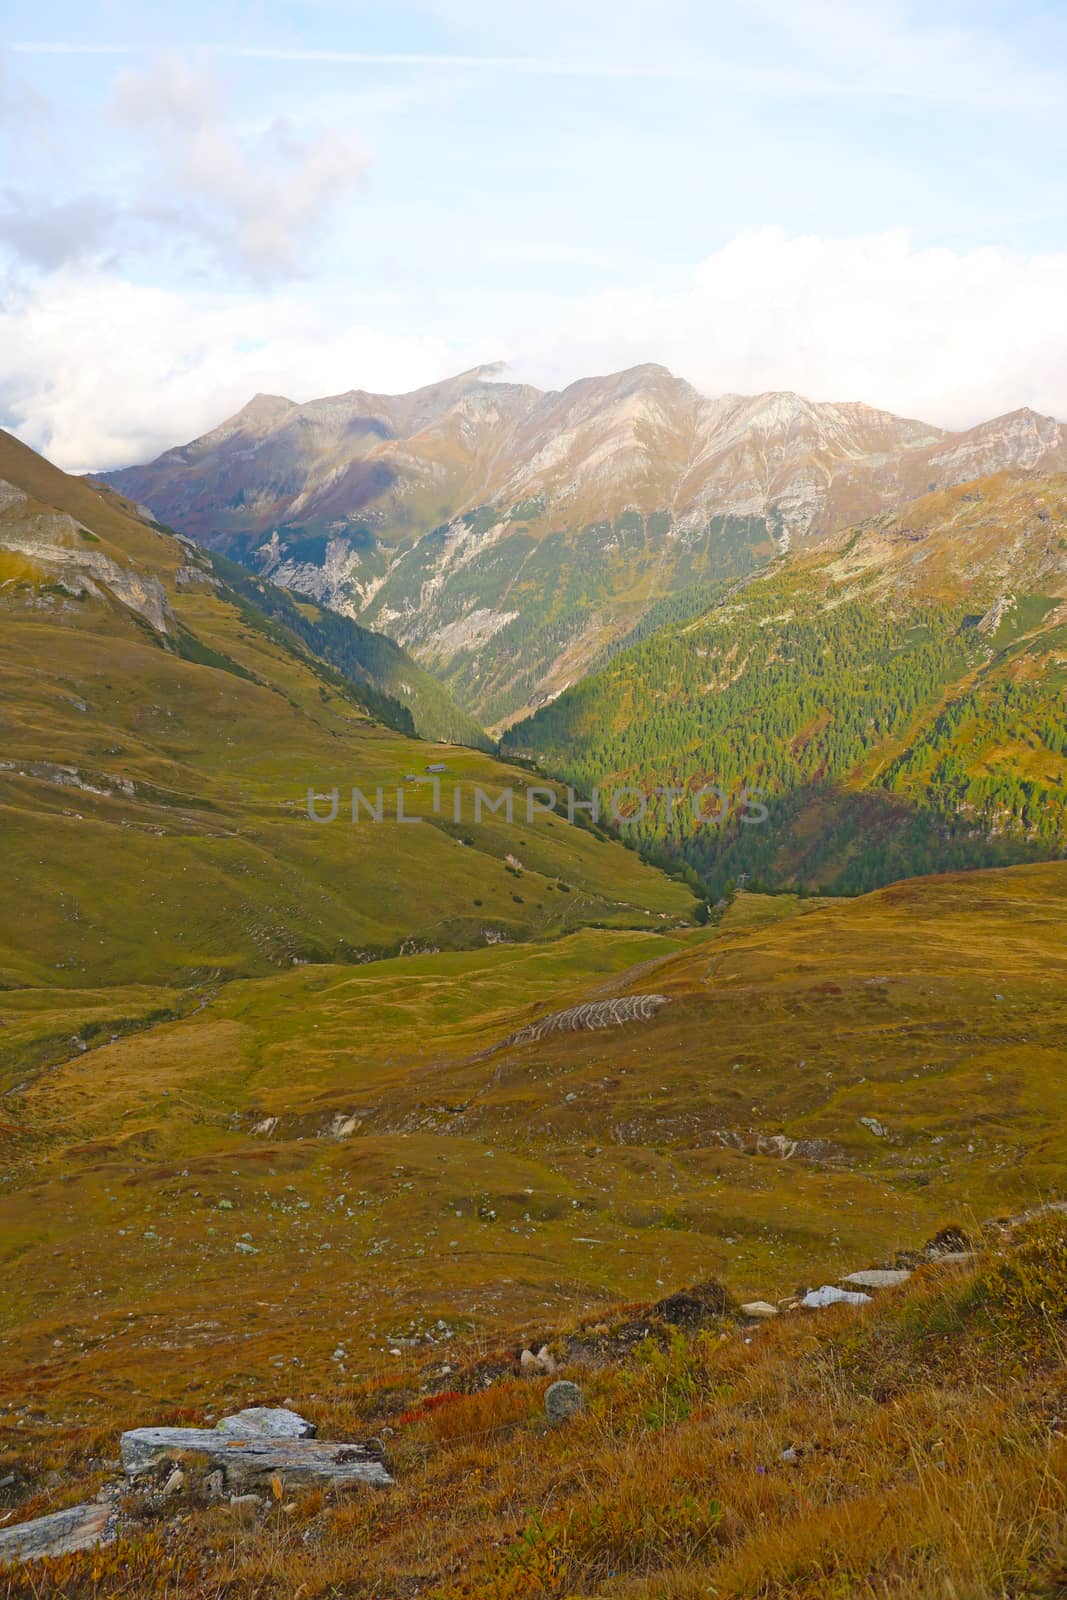 View of the alpine mountains in autumn